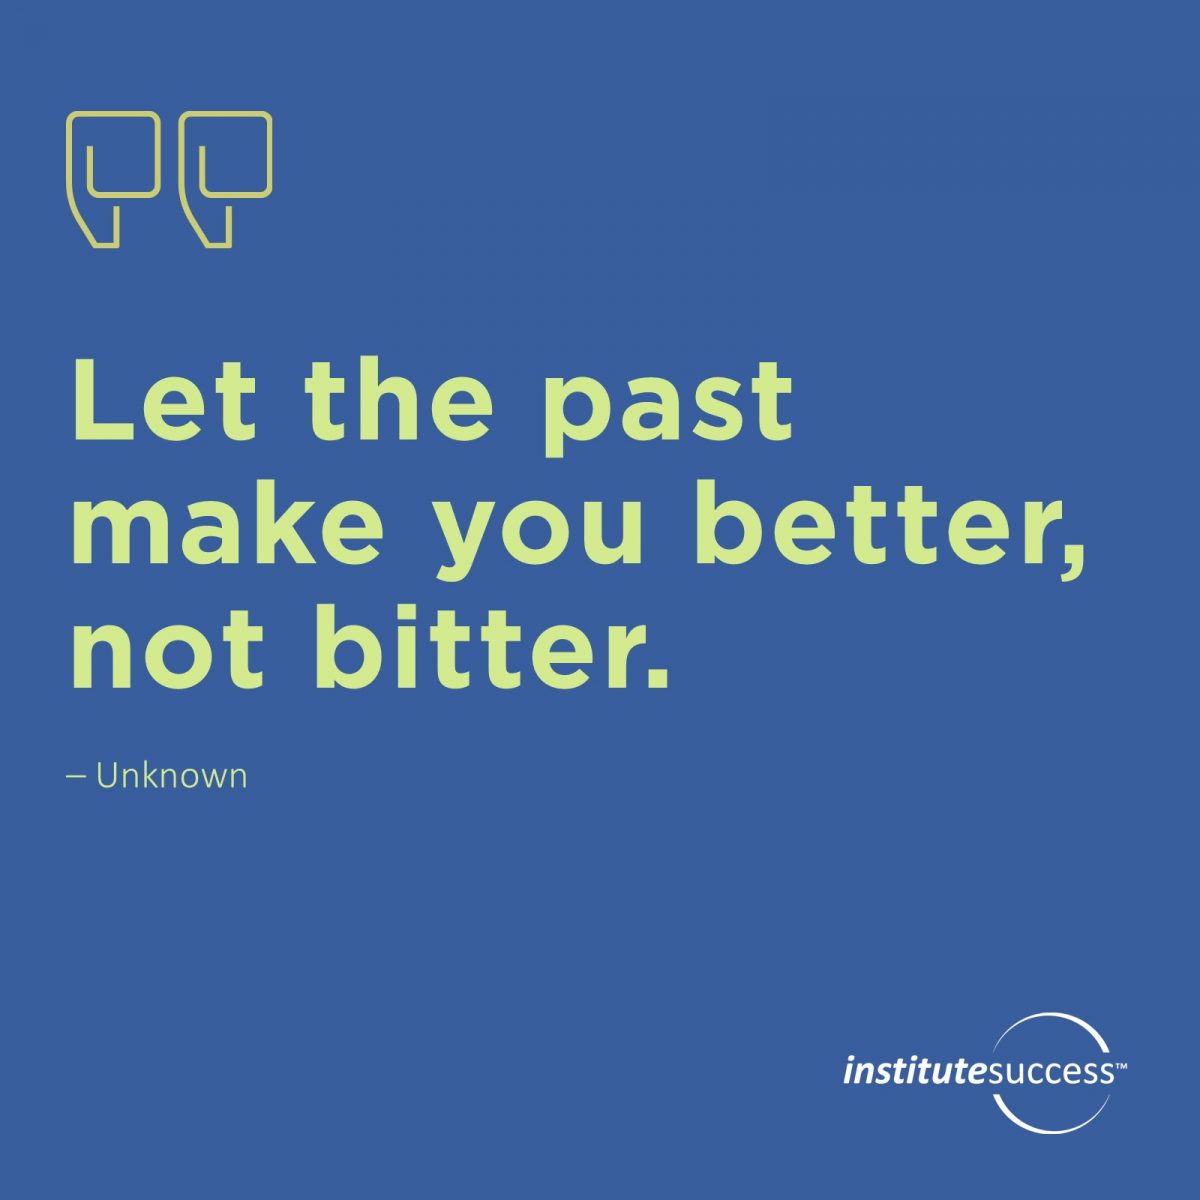 Let the past make you better not bitter. Unknown